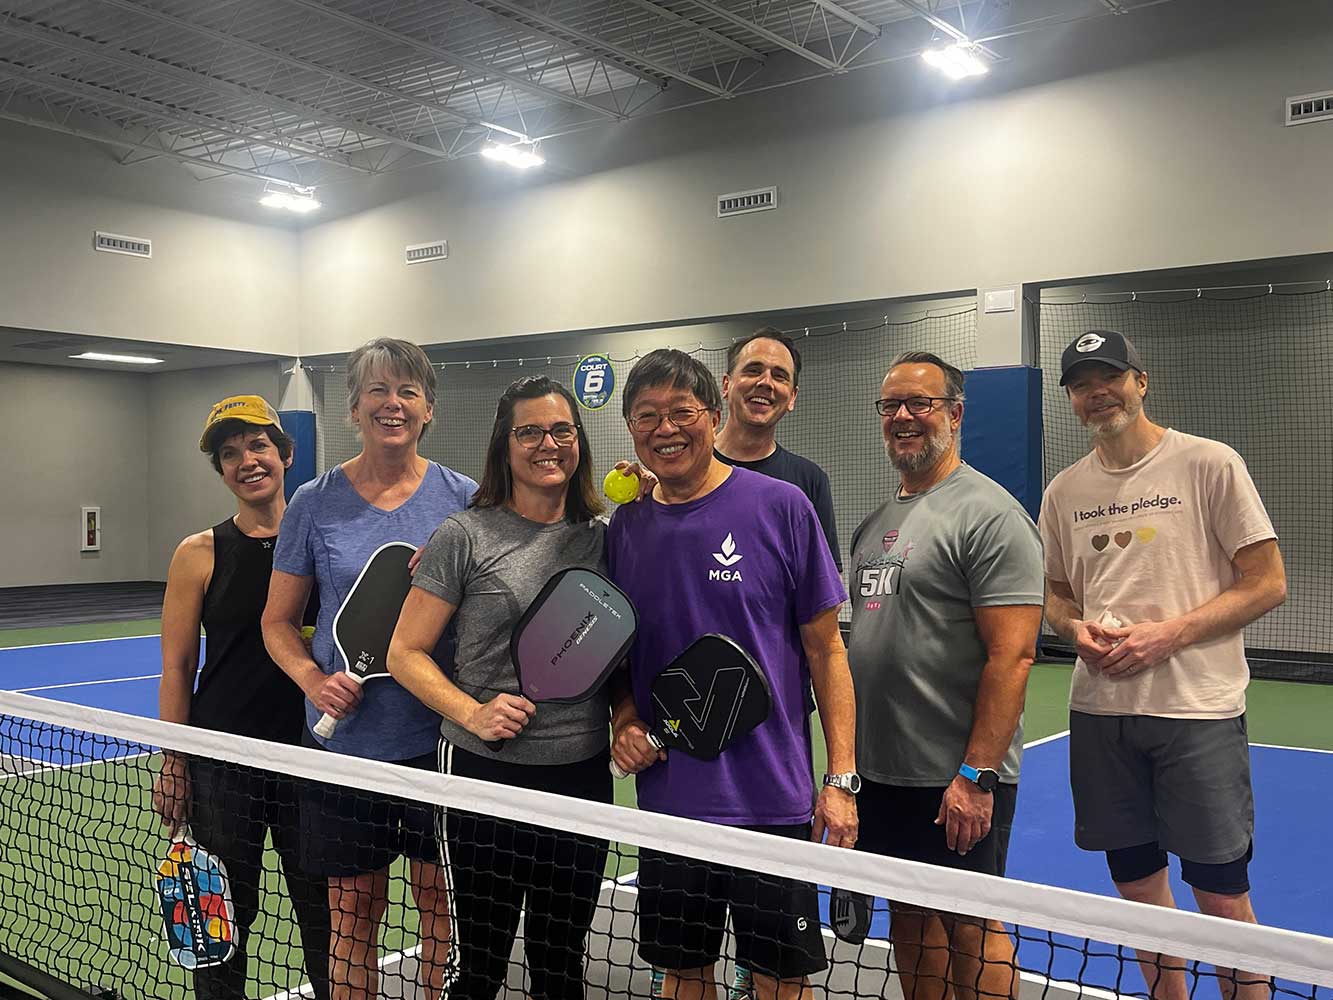 Liz Riley, second from left, shown with some MGA colleagues at the Rhythm and Rally pickleball facility at Macon Mall.